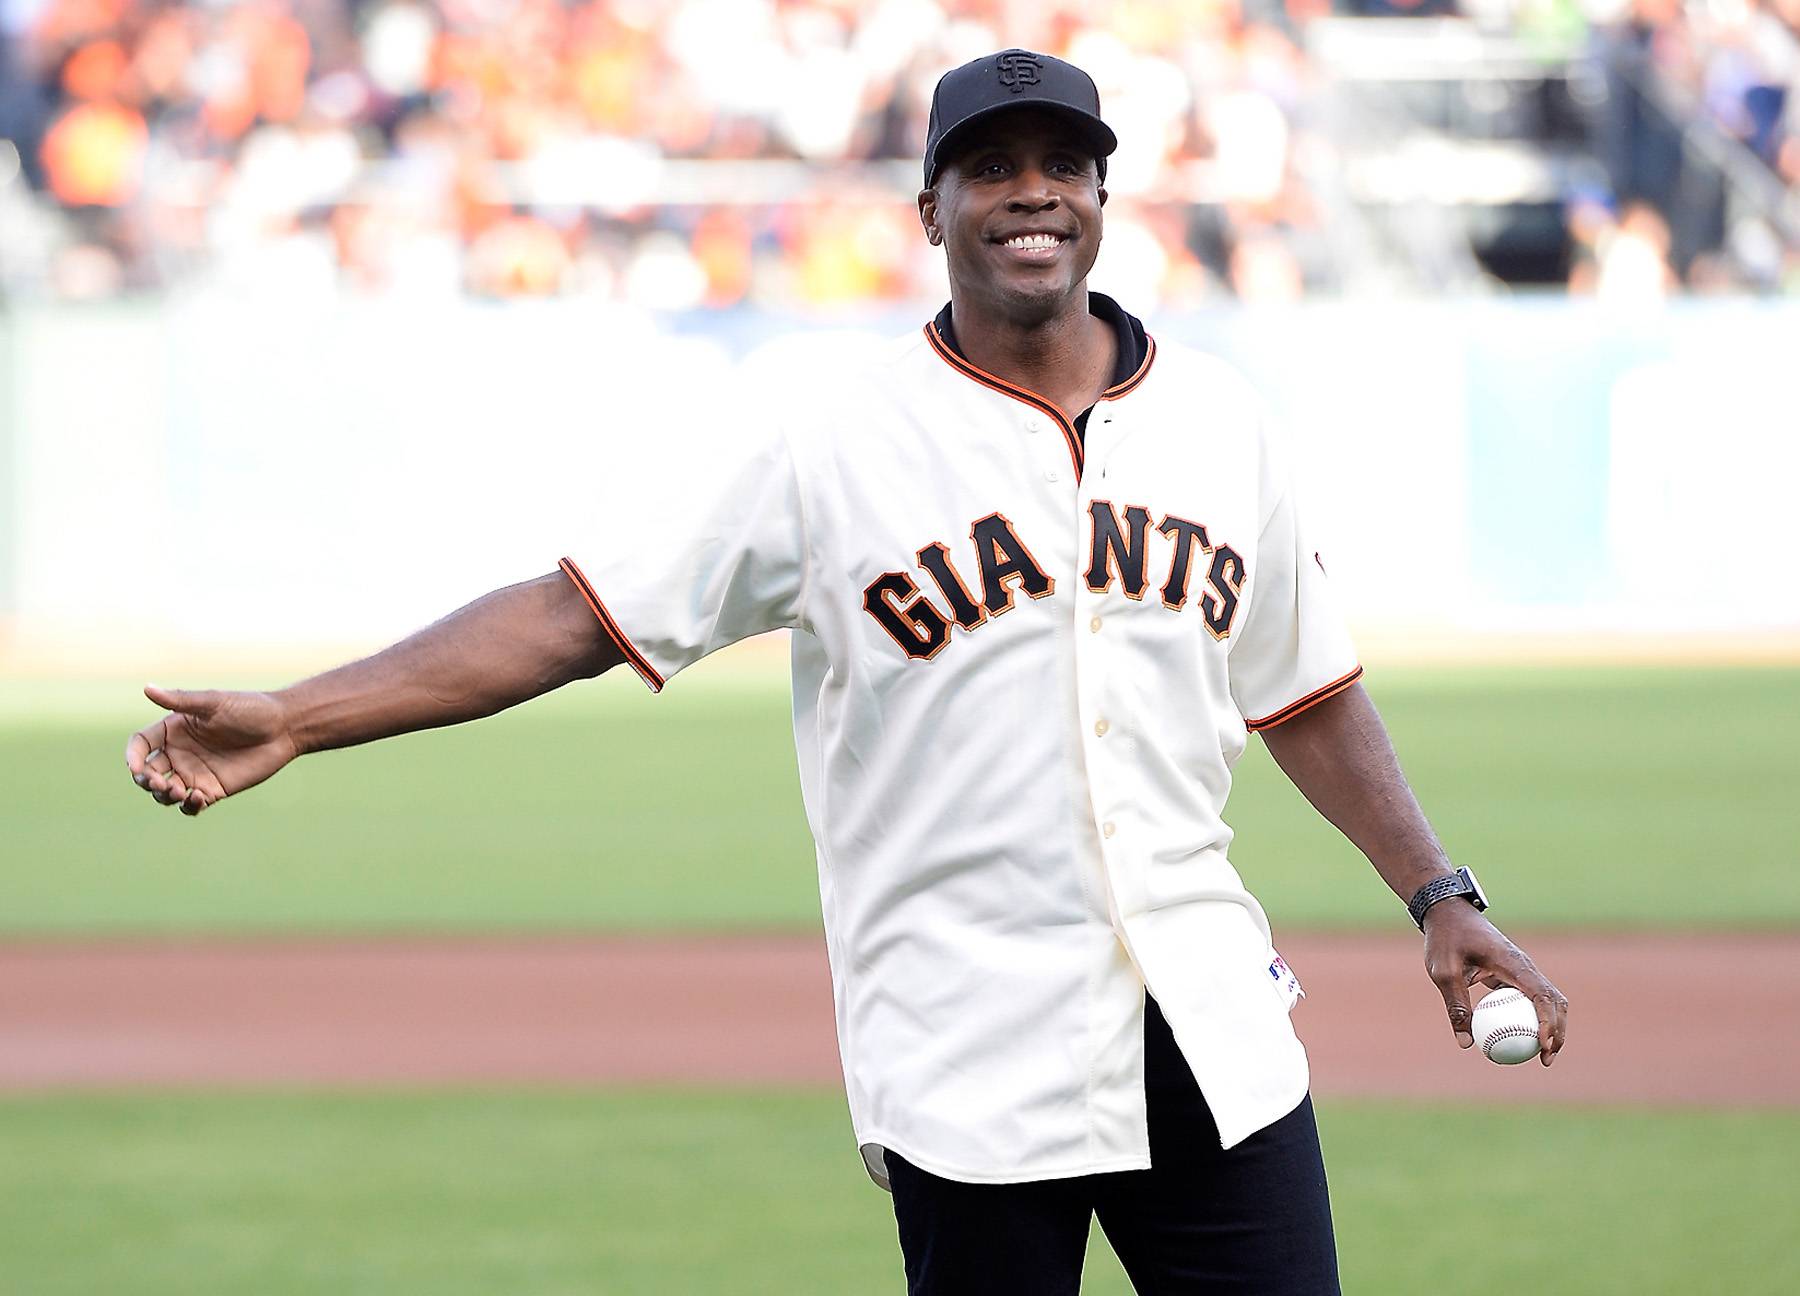 Barry Bonds, Roger Clemens weren't close in possible last Hall of